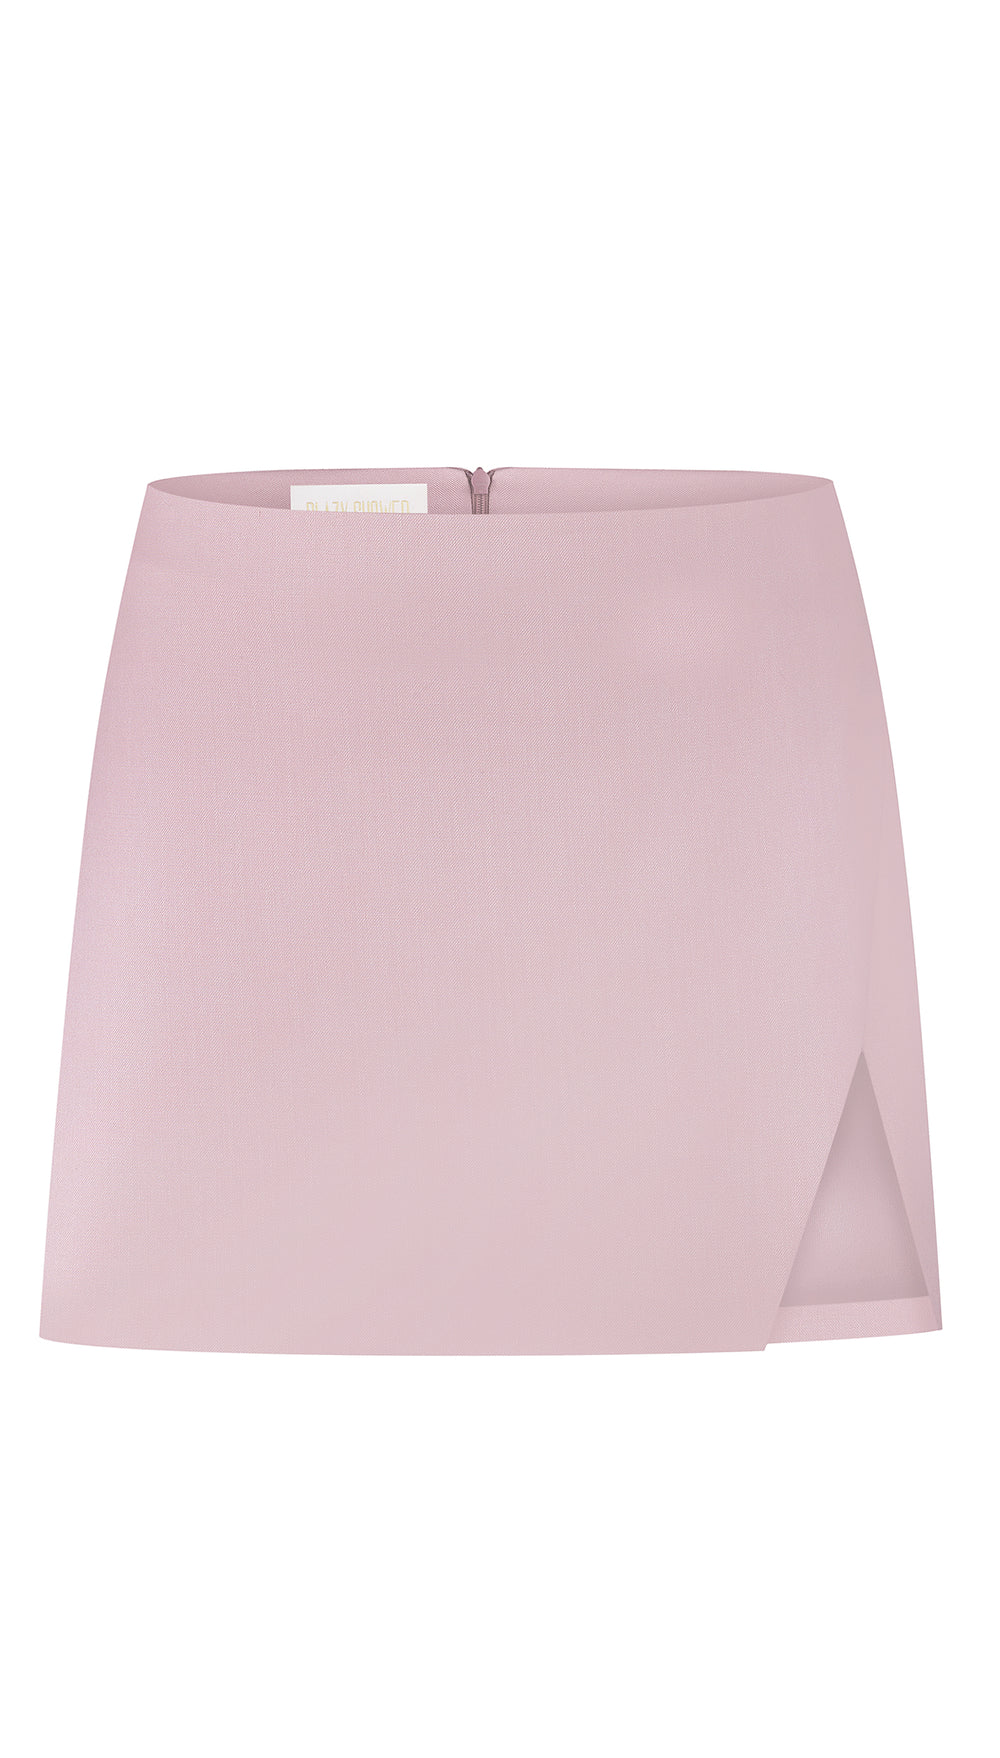 Couture skirt rose